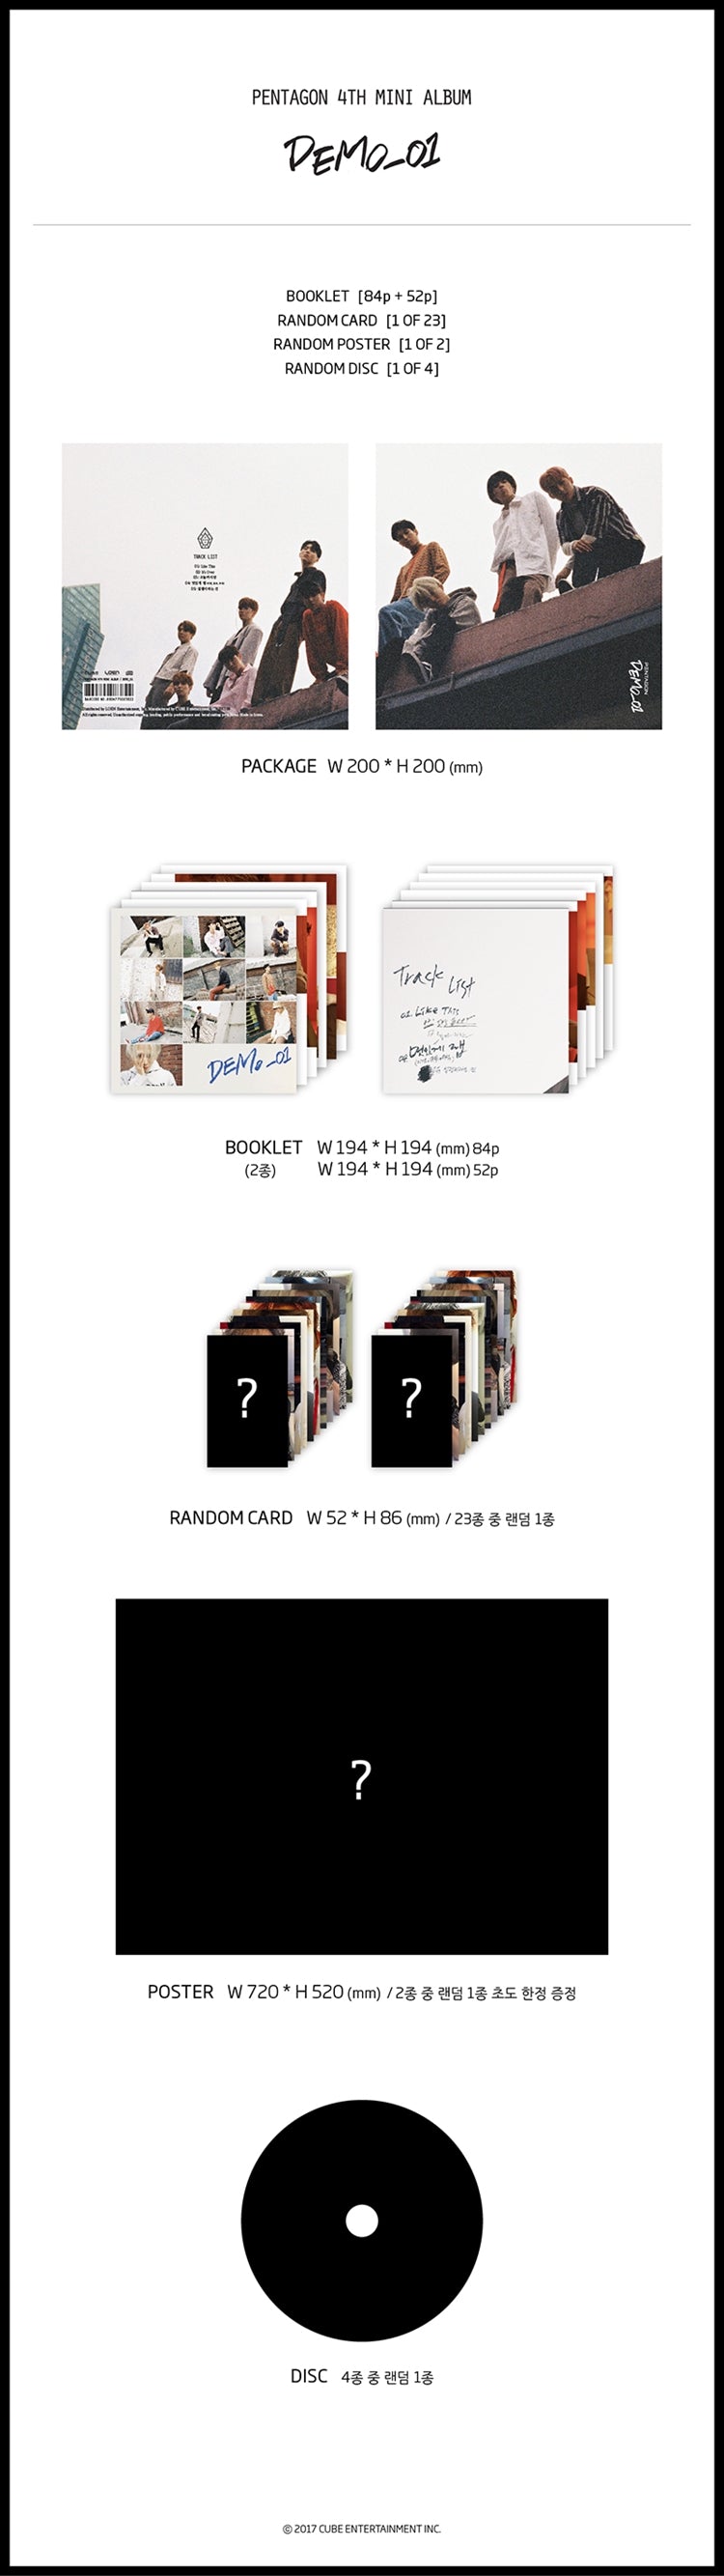 1 CD
2 Booklet (84 + 52 pages)
1 Photo Card